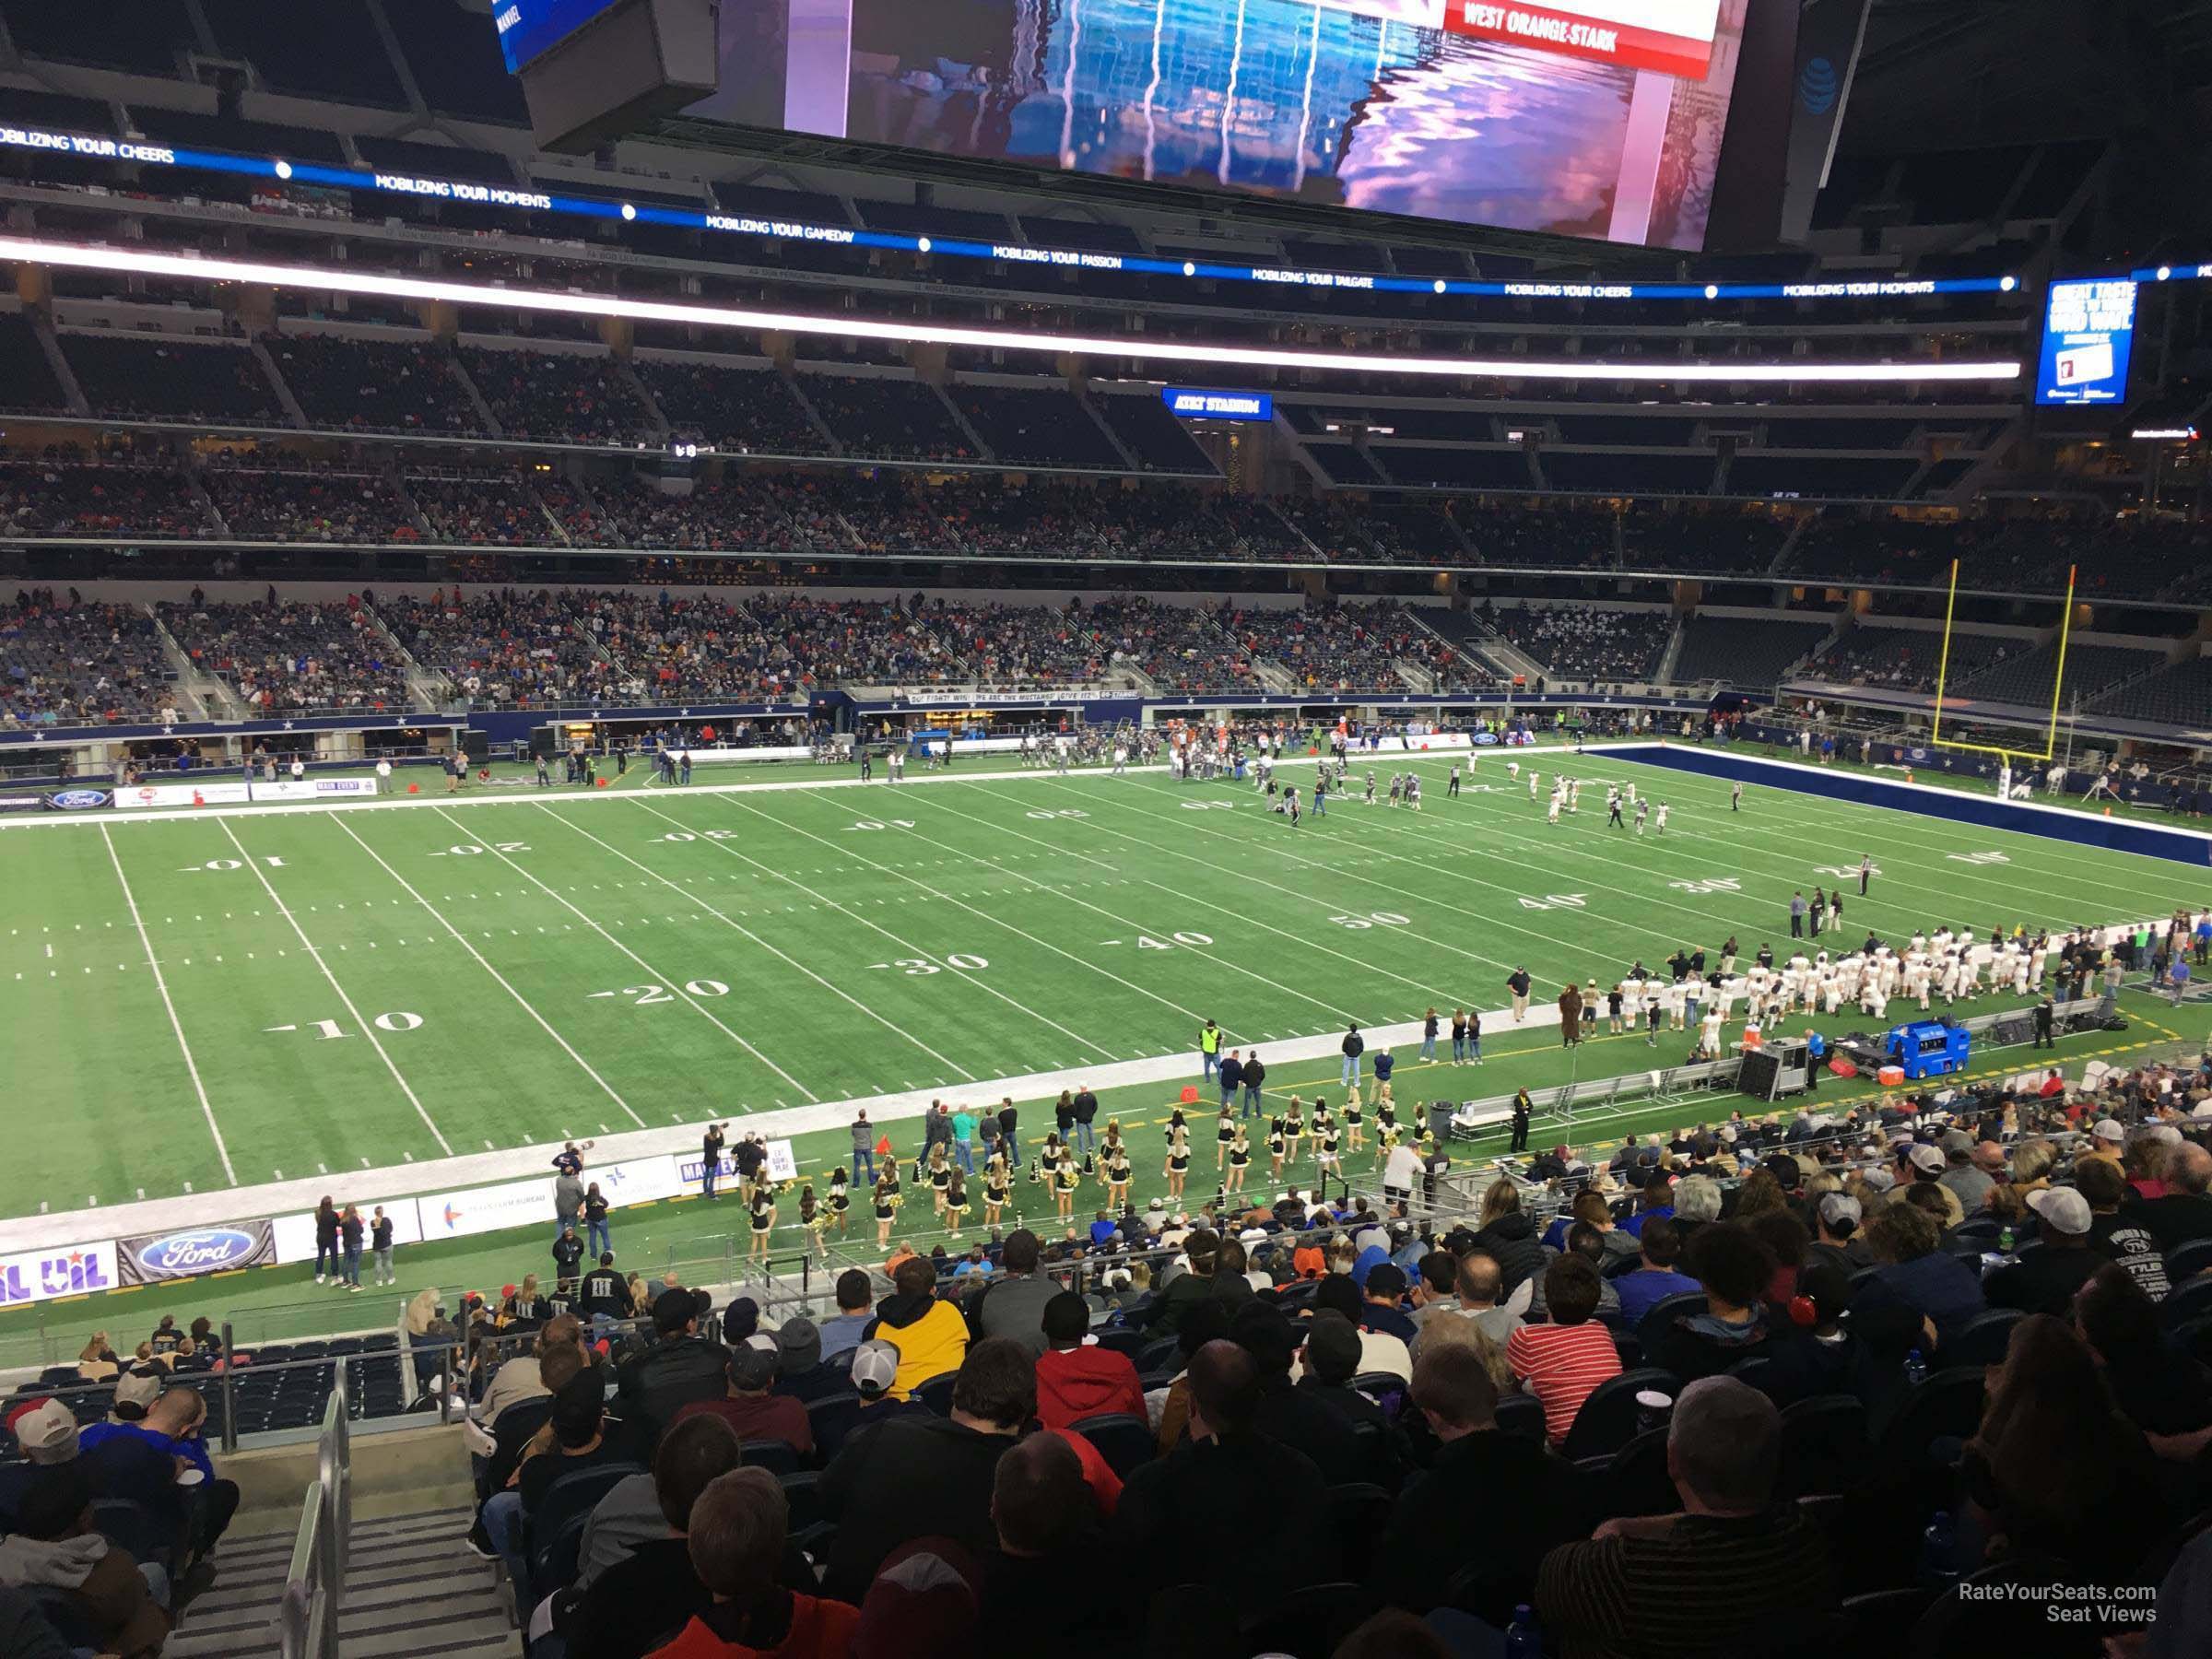 section c238, row 14 seat view  for football - at&t stadium (cowboys stadium)